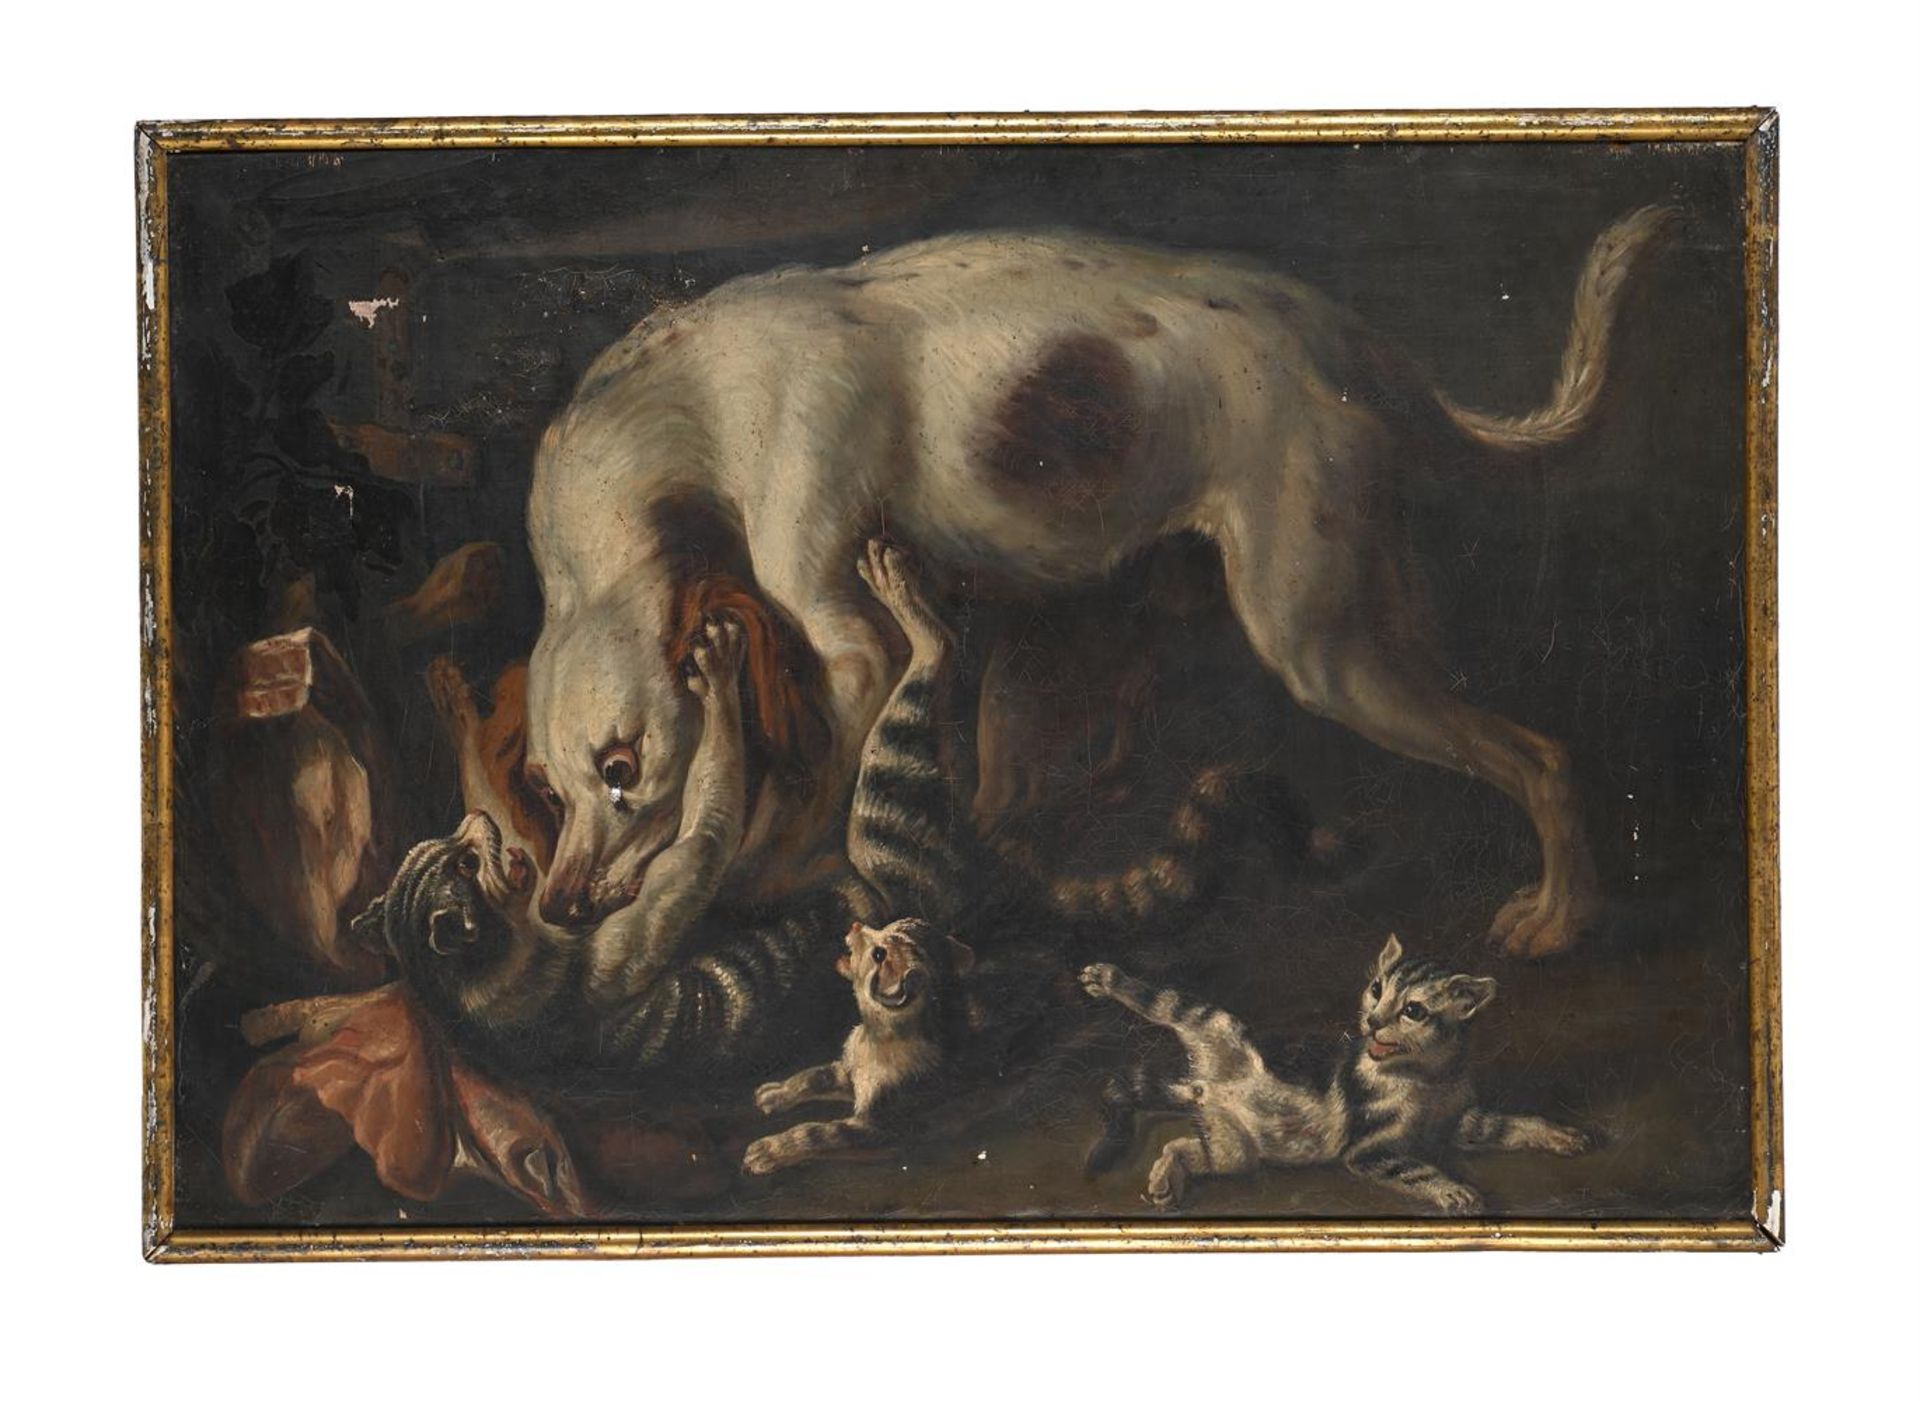 FOLLOWER OF NICASIUS BERNAERTS, A DOG ATTACKING KITTENS - Image 2 of 3